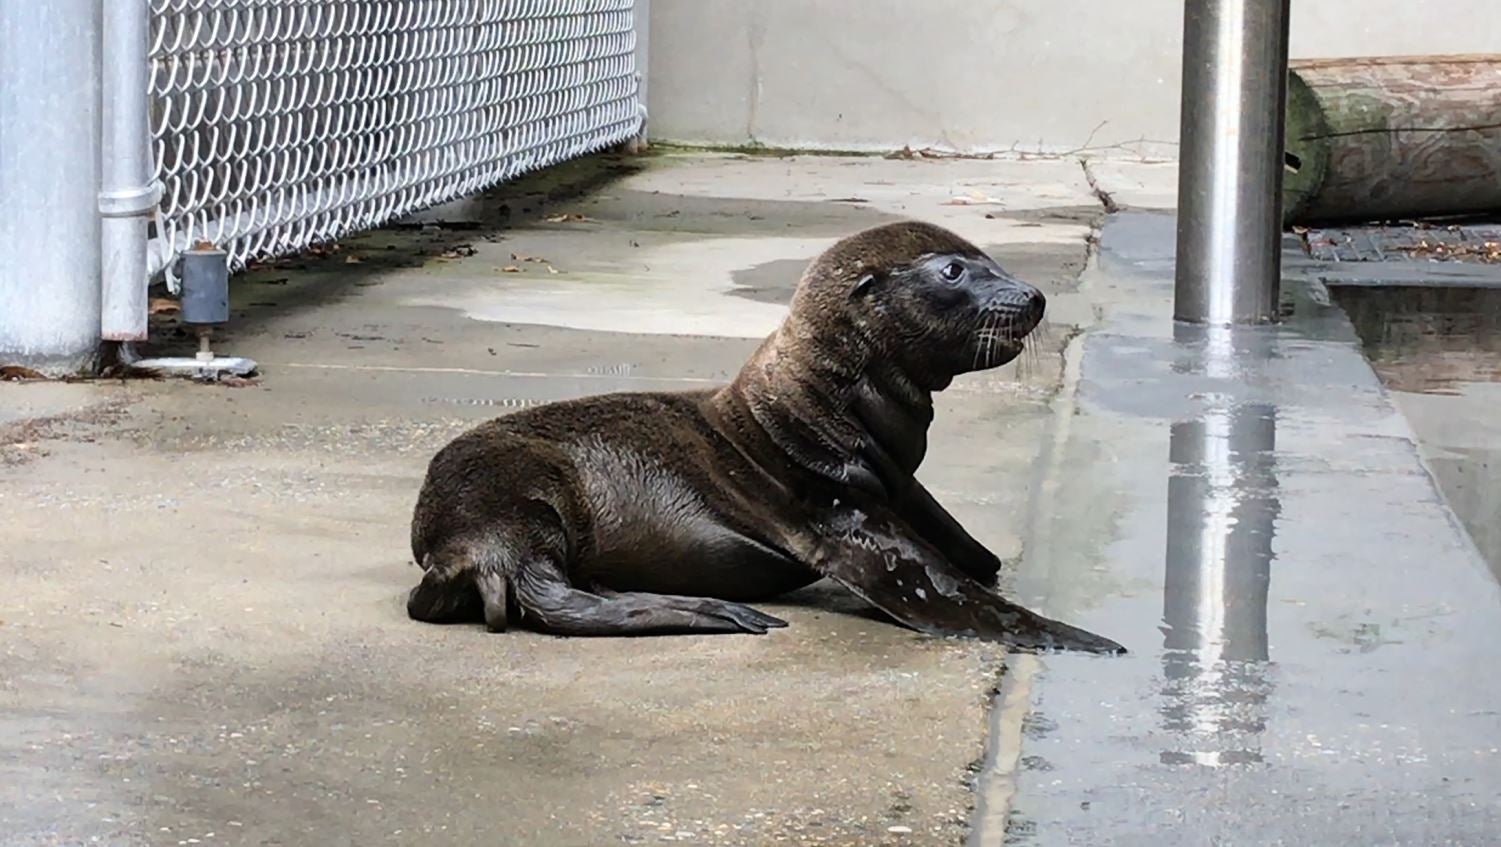 A sea lion pup born June 23, 2019, at the Smithsonian's National Zoo rests on its belly behind the scenes at American Trail. It has dark fur, short flippers and a floppy tail